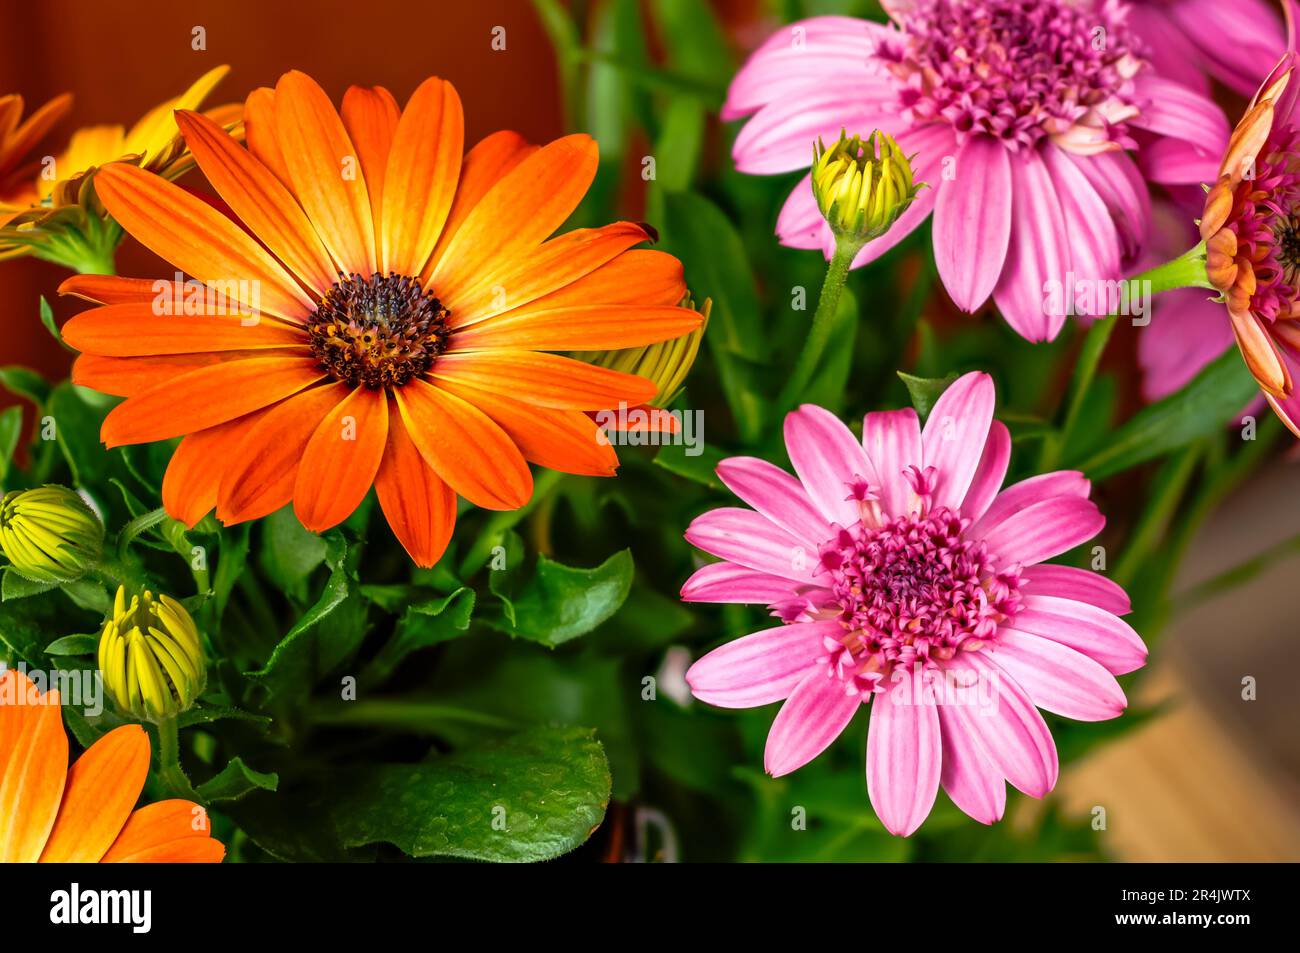 African daisy,Osteospermum,delicate flowers in warm sunny colors,two-colored petals,pink,orange,striking ornamental plant in full bloom from a close d Stock Photo